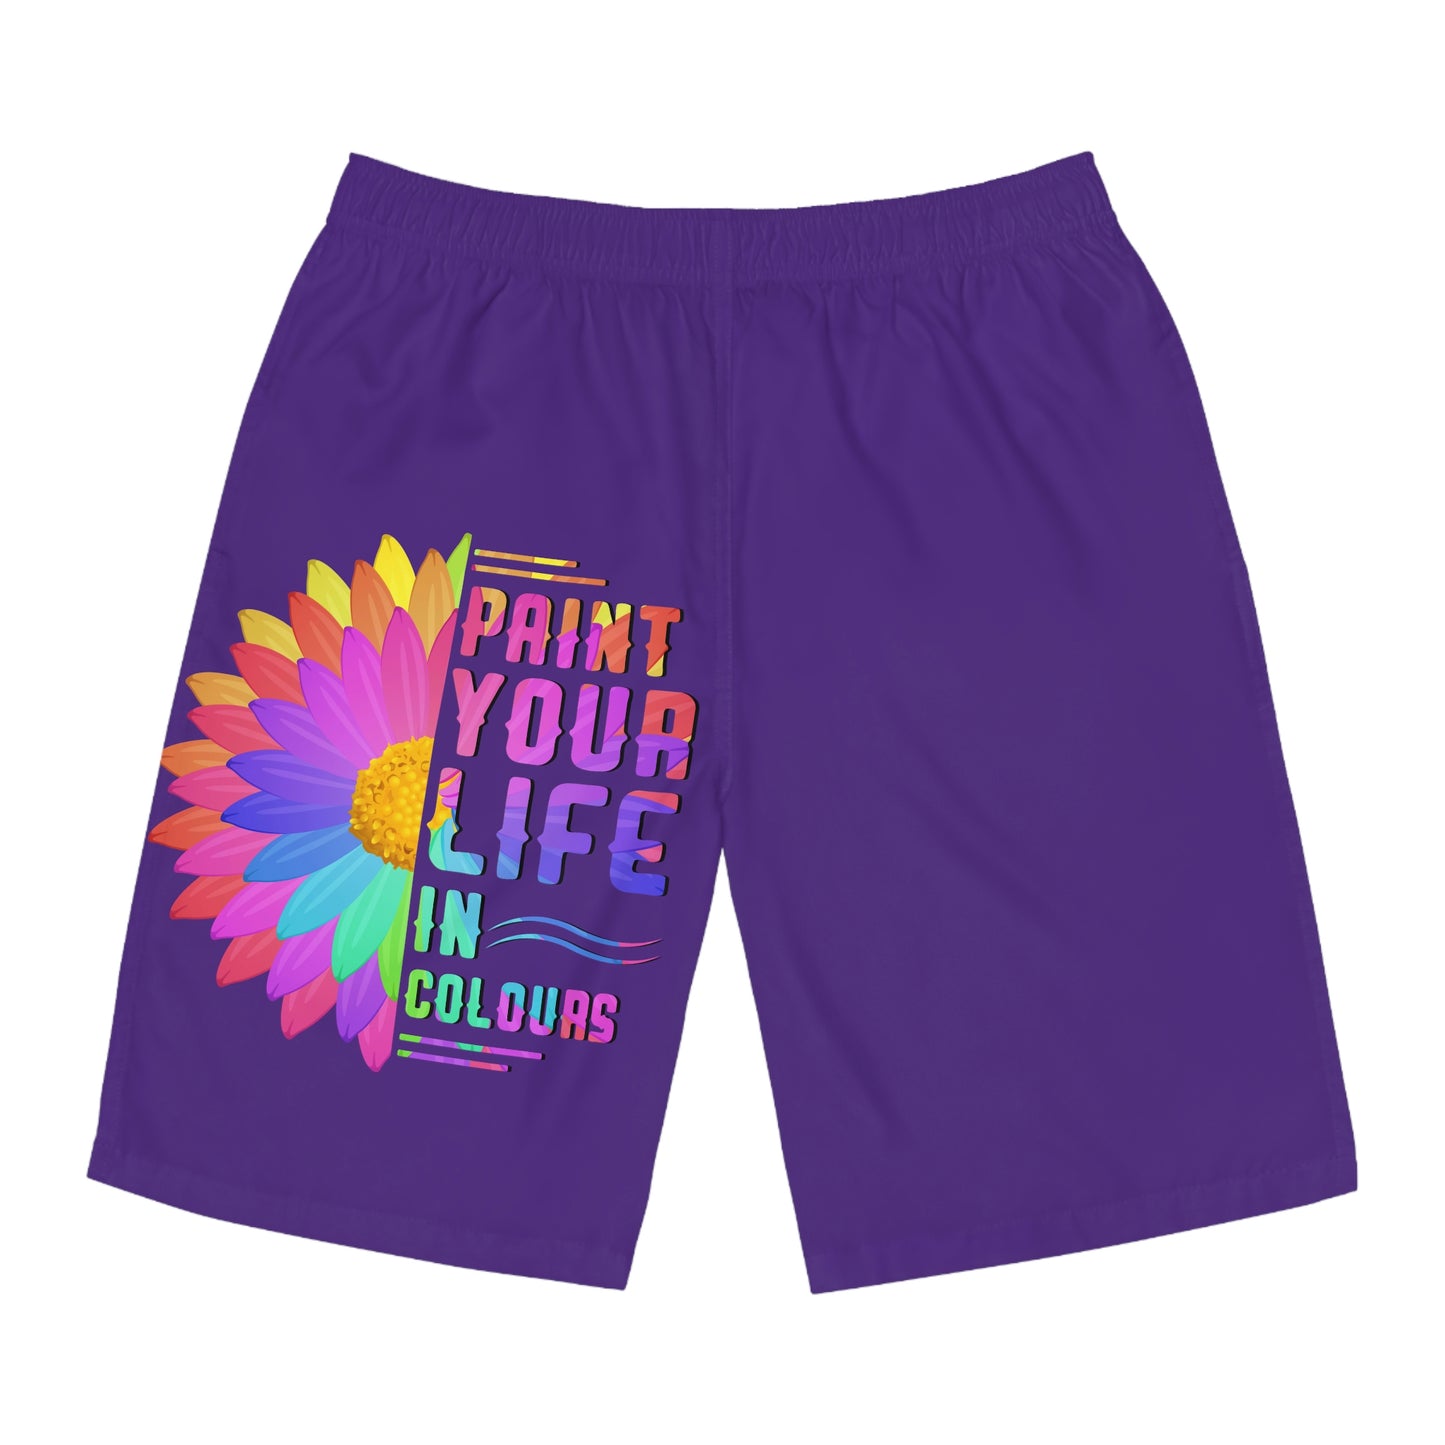 Paint your life in colours - Men's Board Shorts - HobbyMeFree